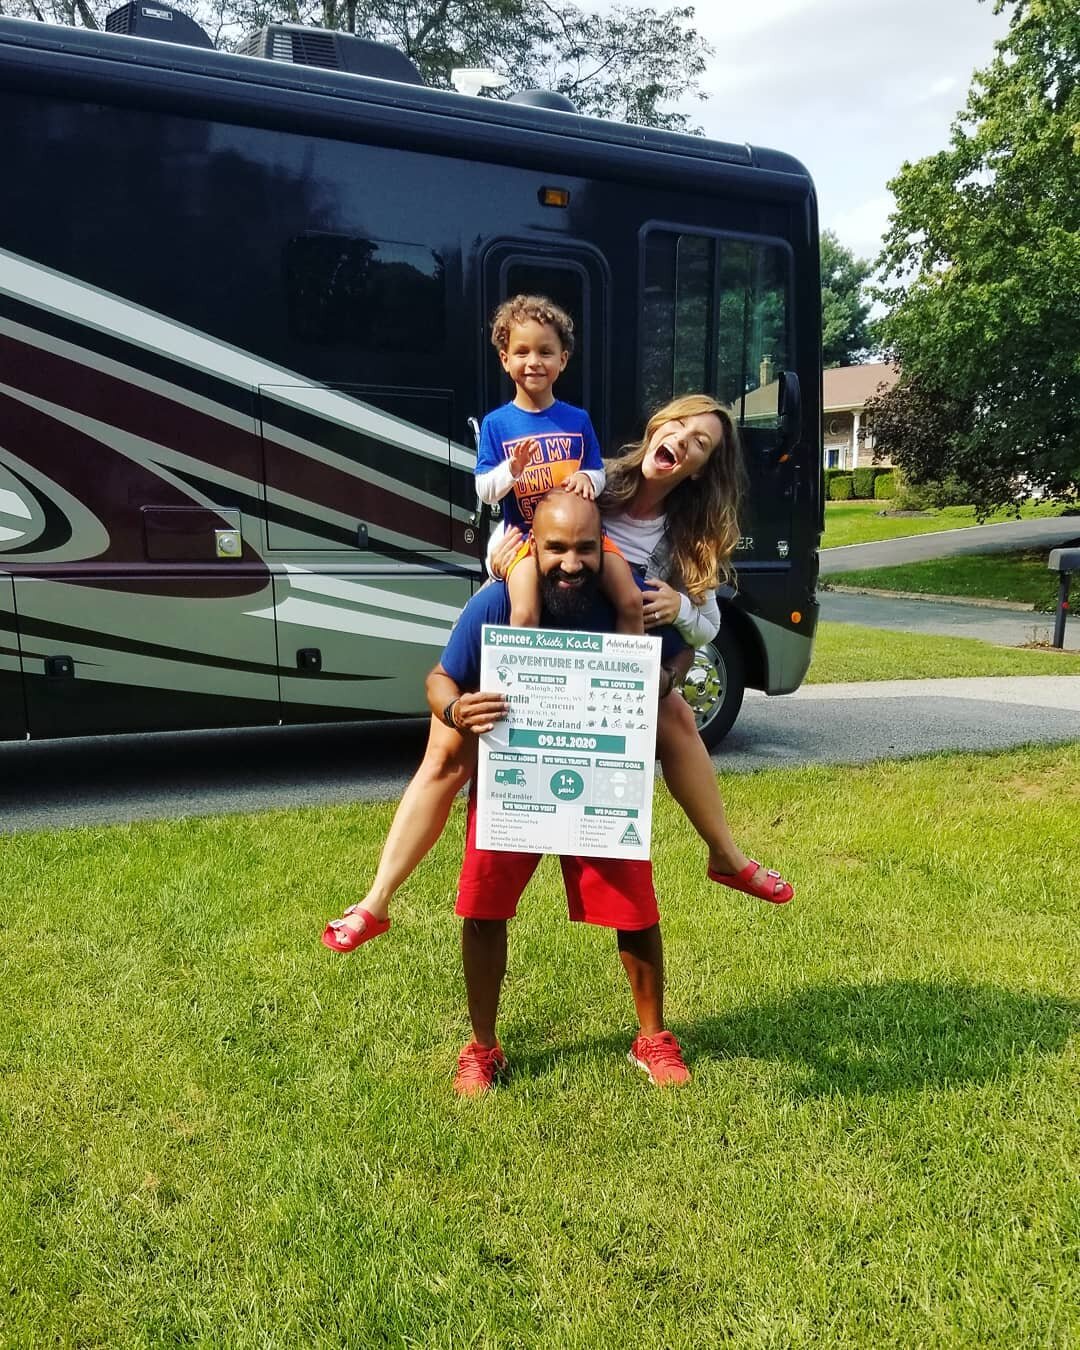 Sometimes the family piggyback ride is a well coordinated portrait. Sometimes it's a hot mess!  Either way, it's just us!  Having fun and goofing around!
.
Today begins our big journey to seek adventure and embrace opportunity! This trip is all about